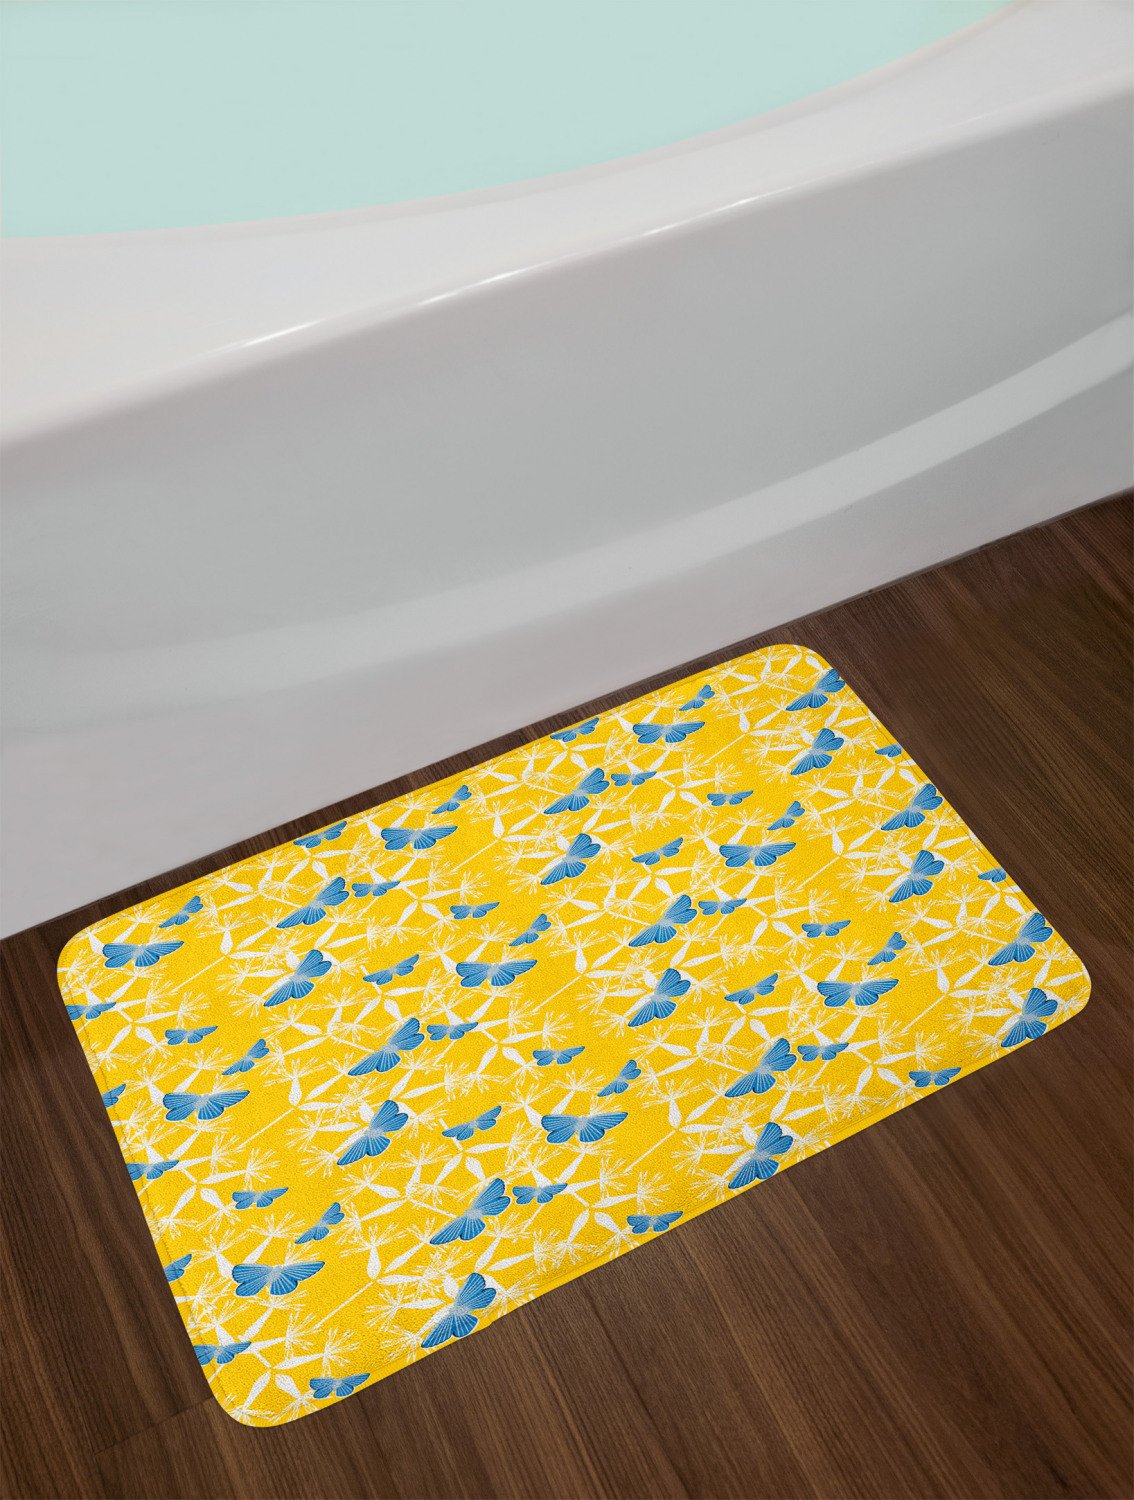 Blue and Yellow Bathroom Decor Luxury Blue and Yellow Bath Mat Bathroom Decor Plush Non Slip Mat 29 5&quot; X 17 5&quot;